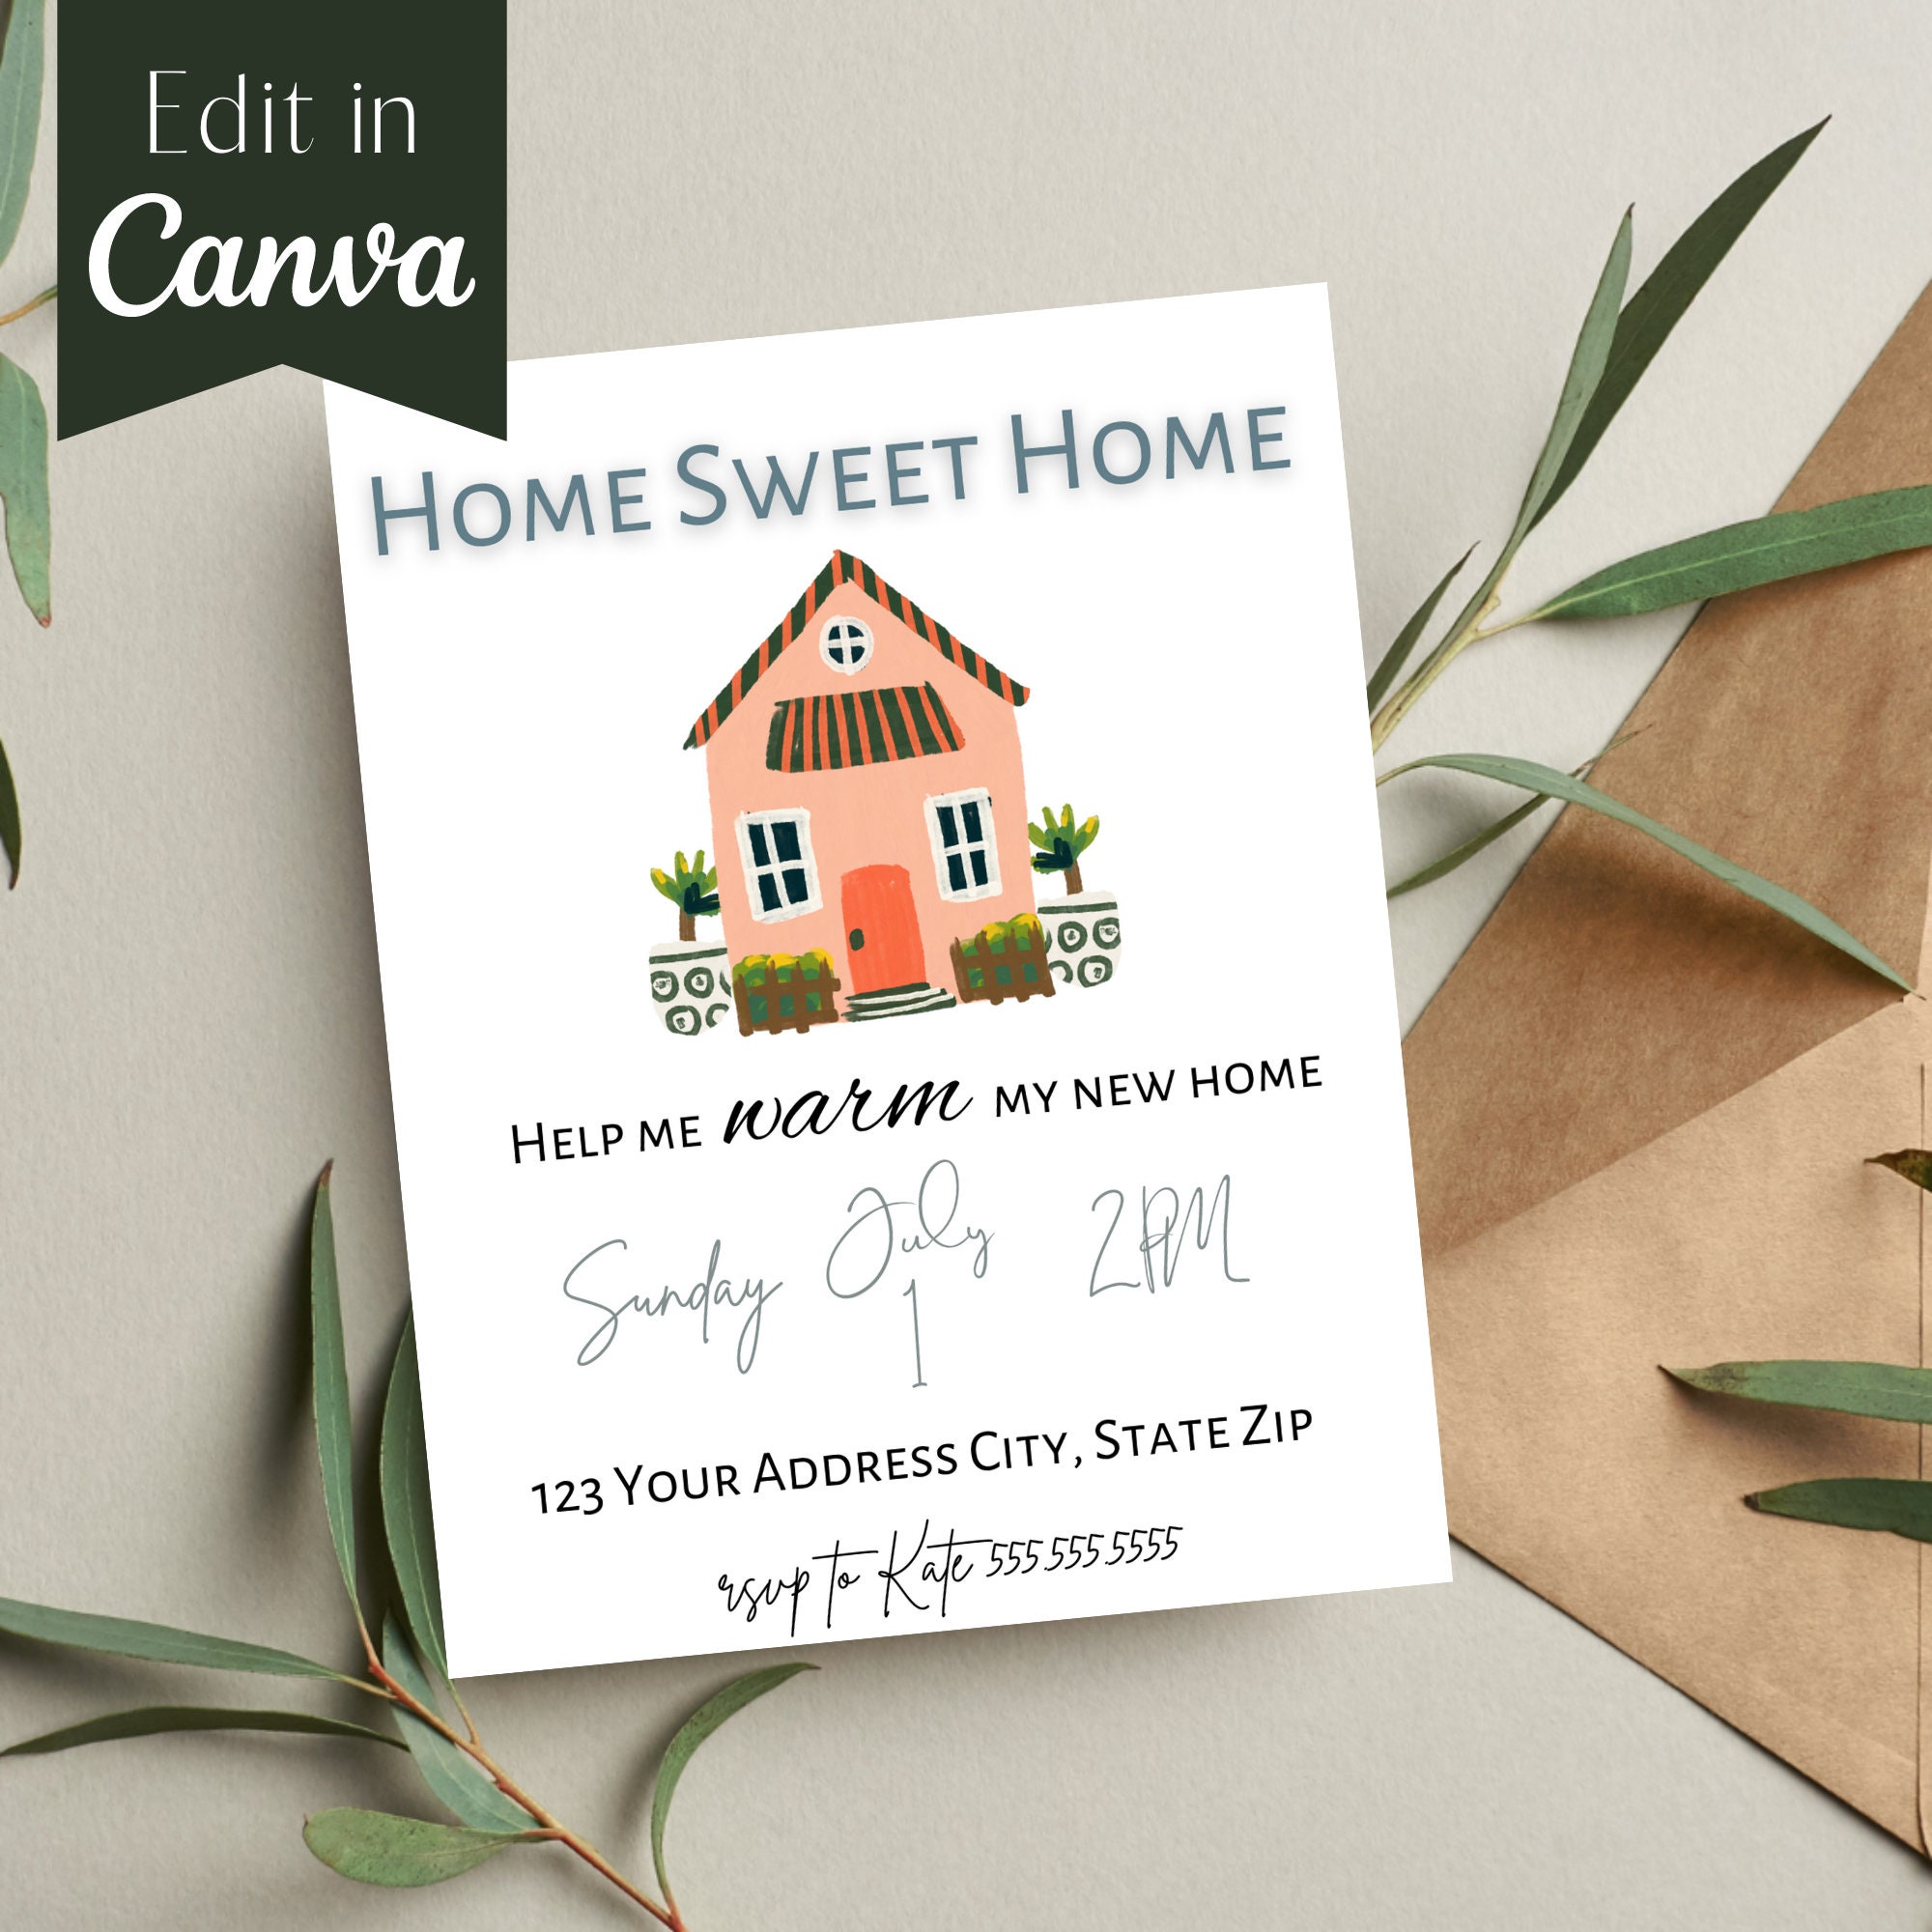 Housewarming Invitations - Customize & Print or Download